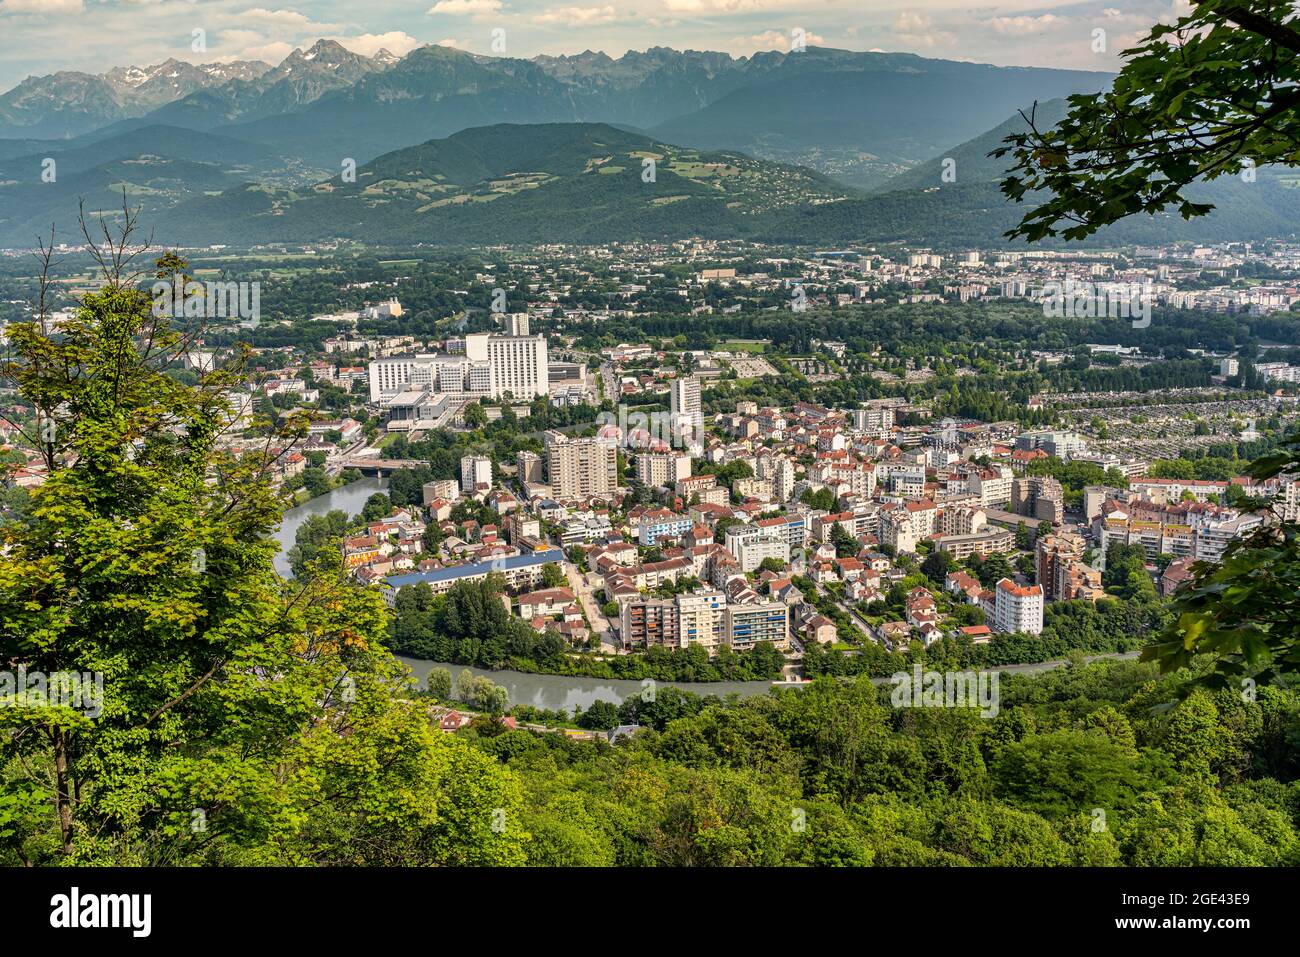 The city of Grenoble is present in all the events of French history. Today it is the center of various social and scientific advances.Grenoble, France Stock Photo